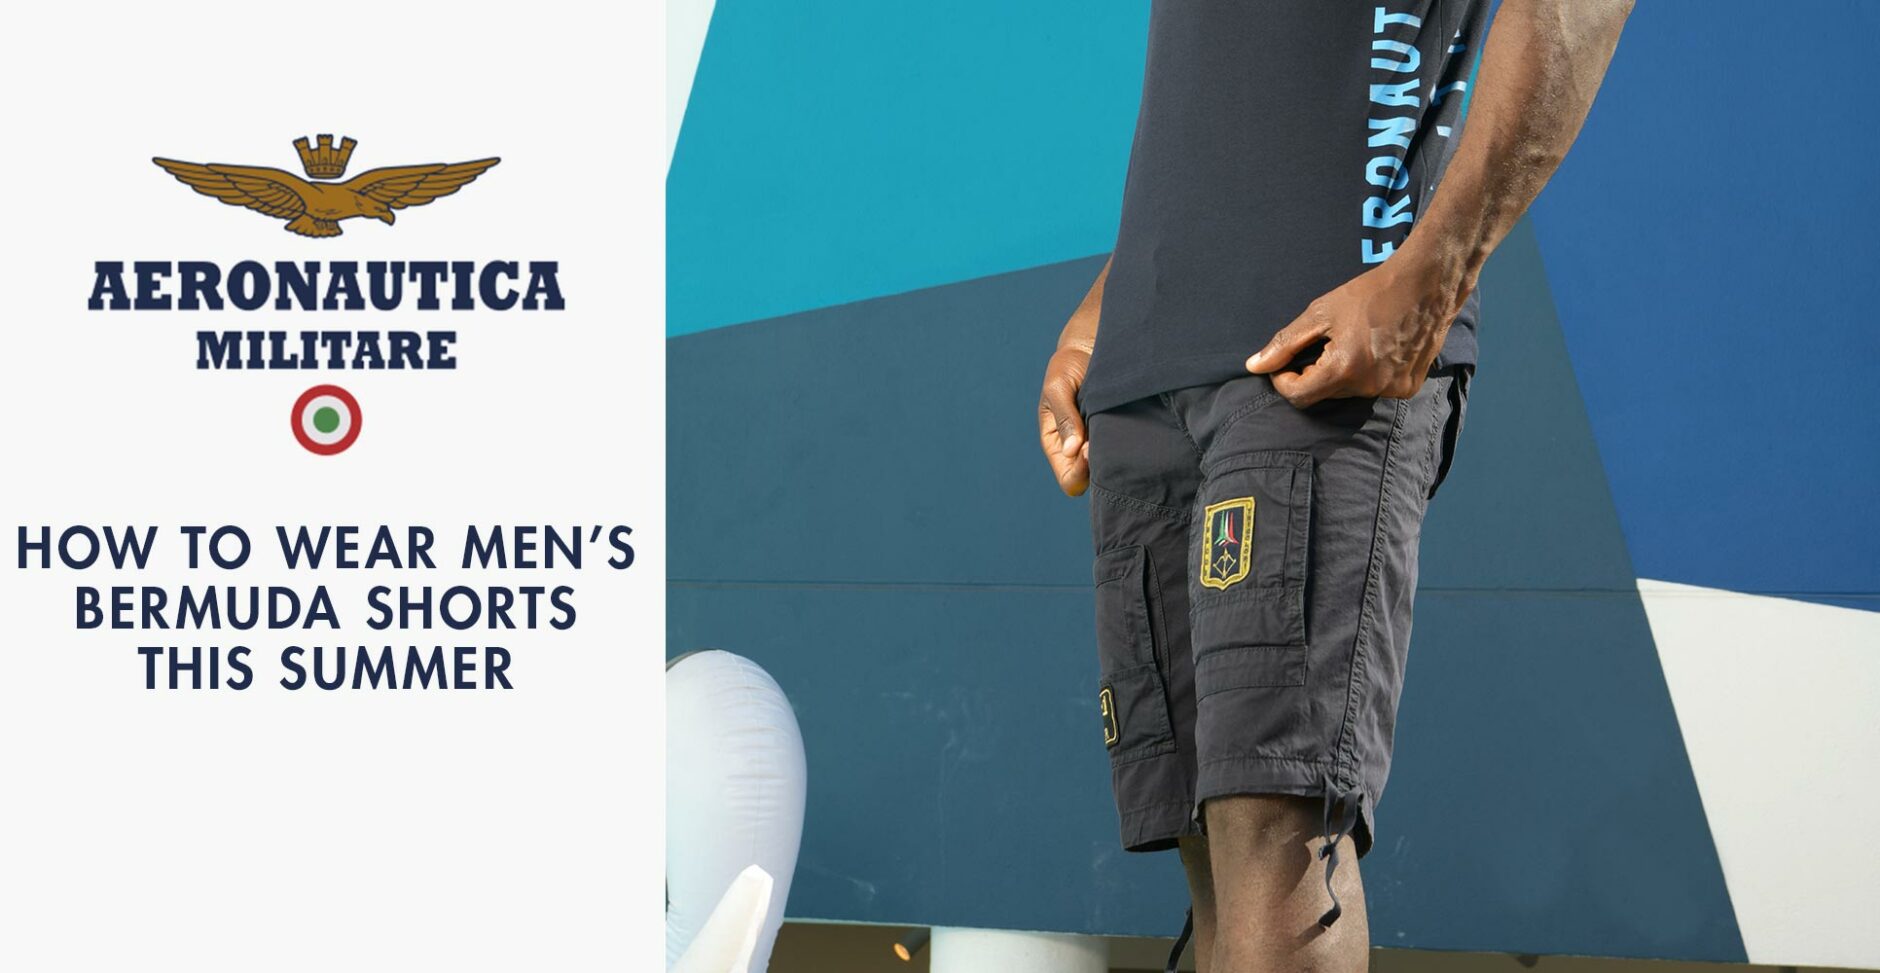 How to Wear Men’s Bermuda Shorts this Summer